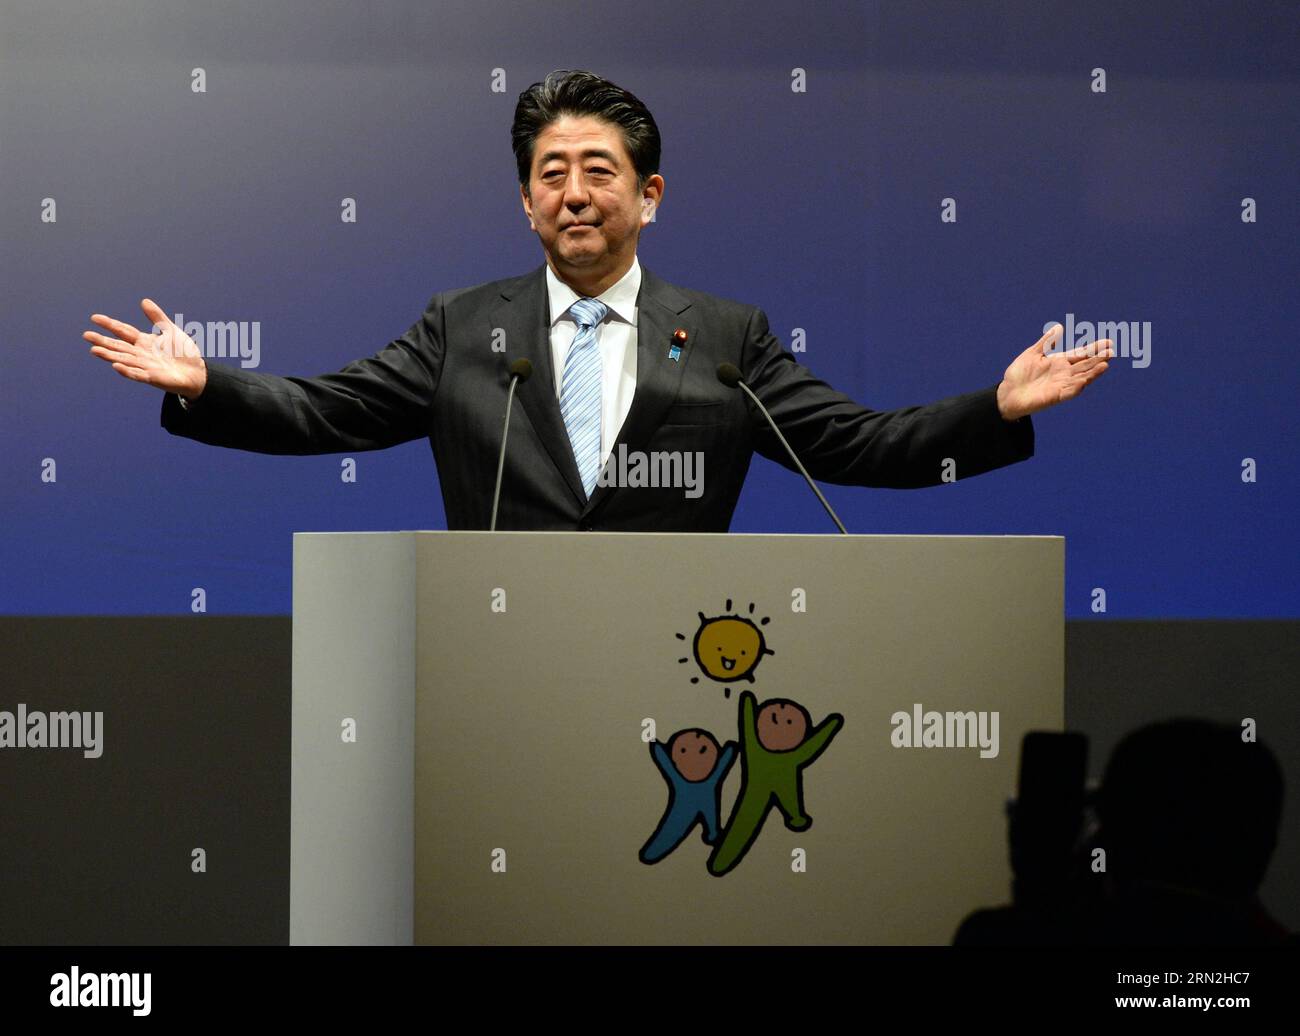 (150308) -- TOKYO, March 8, 2015 -- Japanese Prime Minister Shinzo Abe delivers a speech during the annual convention of the Liberal Democratic Party (LDP), in Tokyo, Japan, March 8, 2015. Japanese Prime Minister Shinzo Abe called Sunday for deeper discussion on revising Japan s pacifist Constitution as his ruling Liberal Democratic Party (LDP) held its annual convention. ) (lyi) JAPAN-TOKYO-LDP-ABE MaxPing PUBLICATIONxNOTxINxCHN   Tokyo March 8 2015 Japanese Prime Ministers Shinzo ABE delivers a Speech during The Annual Convention of The Liberal Democratic Party LDP in Tokyo Japan March 8 201 Stock Photo